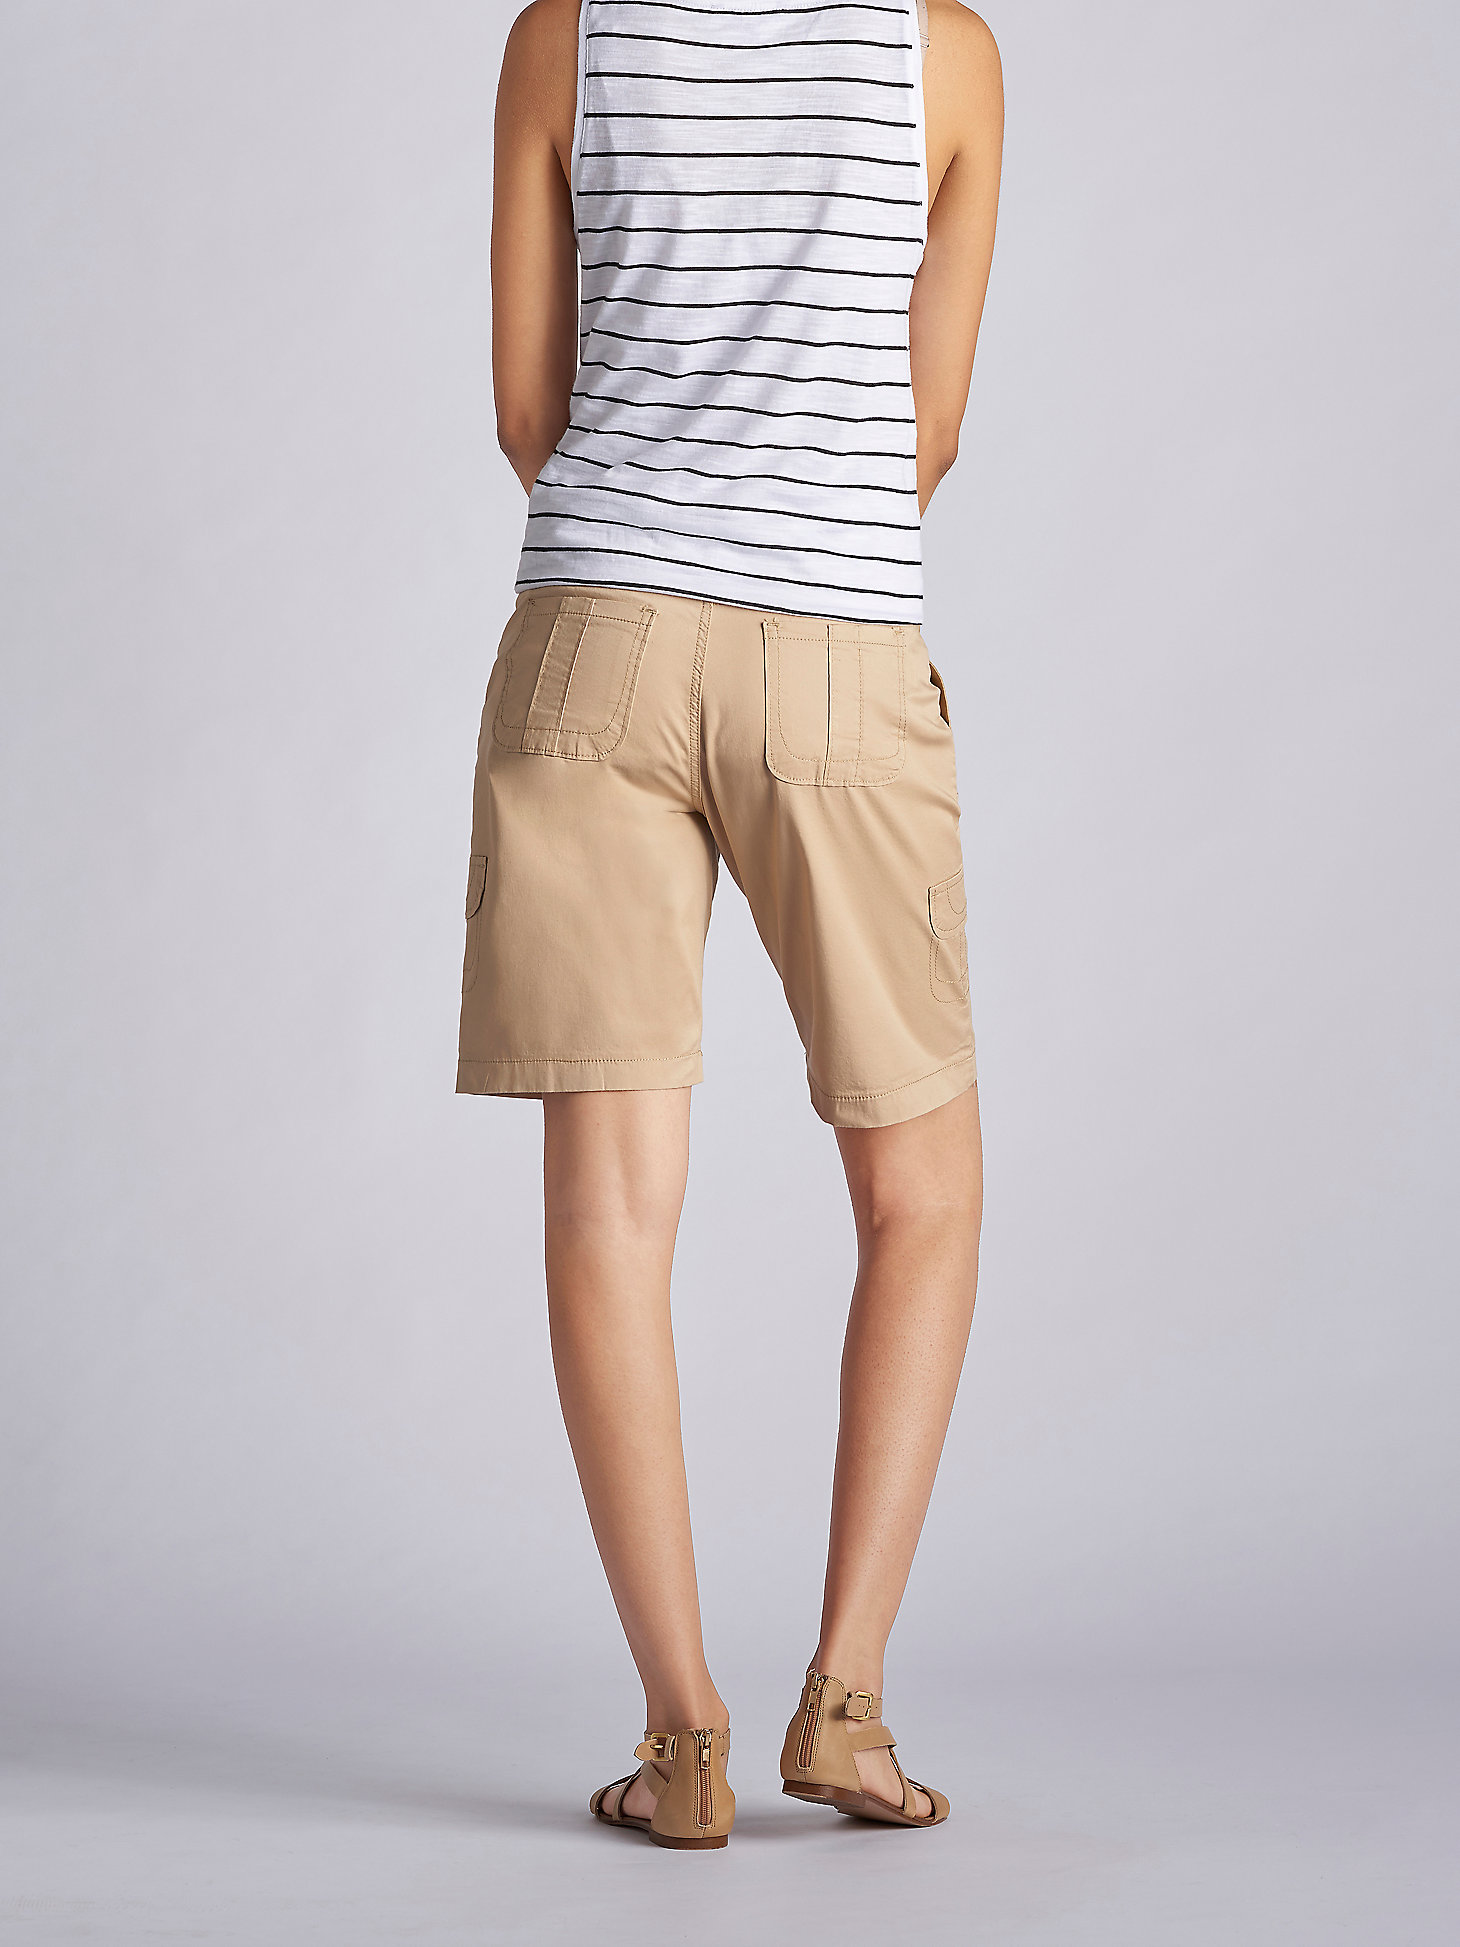 Women’s Relaxed Fit Avey Cargo Bermuda (Petite) in Cafe alternative view 1